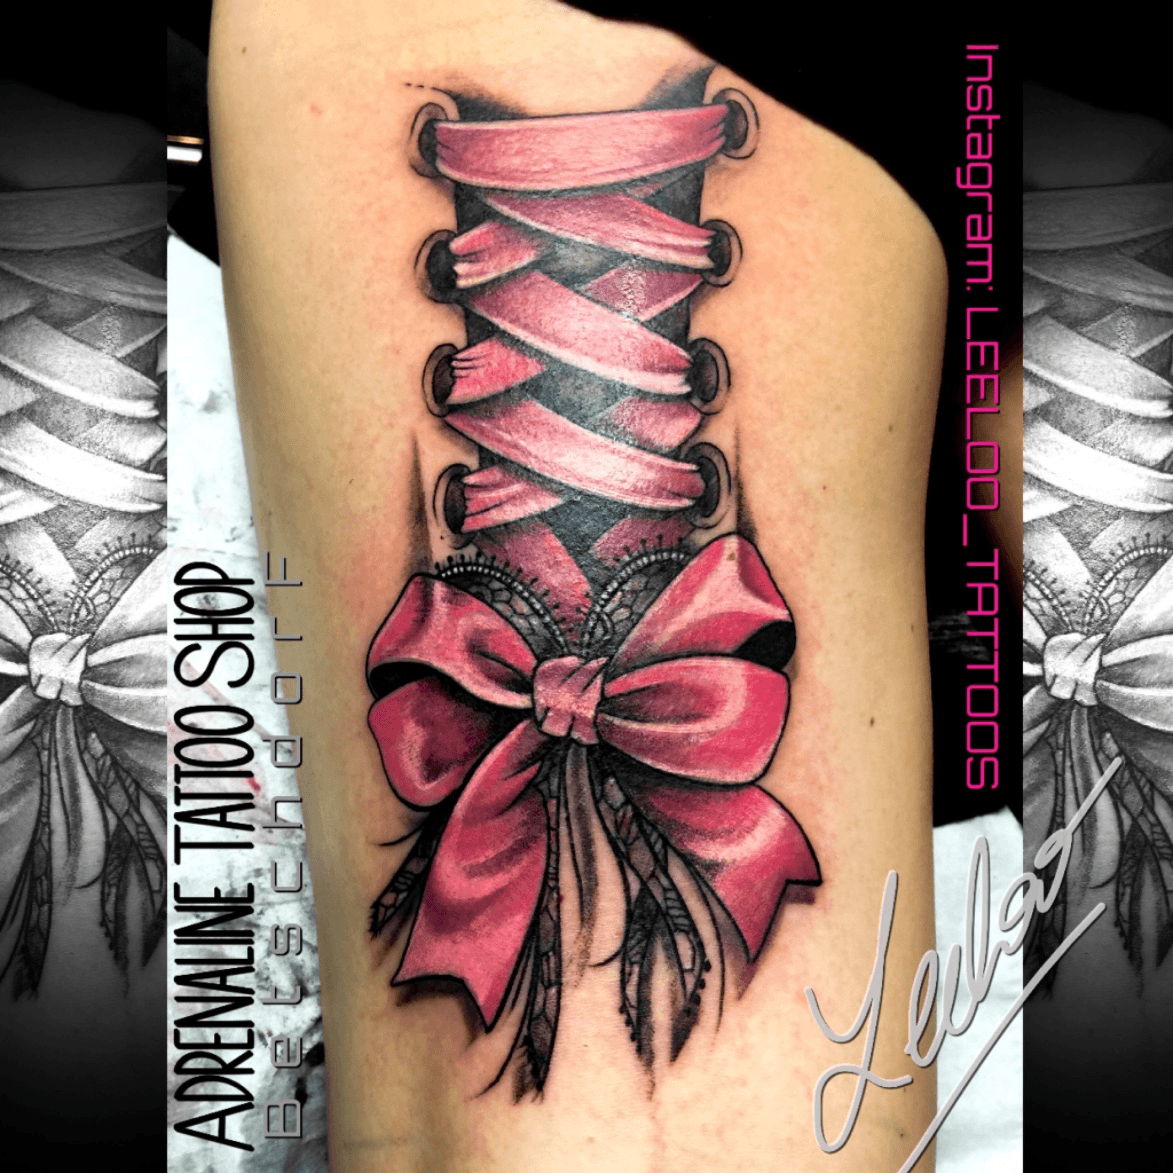 lace up stocking ribbon tattoo by SquirlyBarbie on DeviantArt